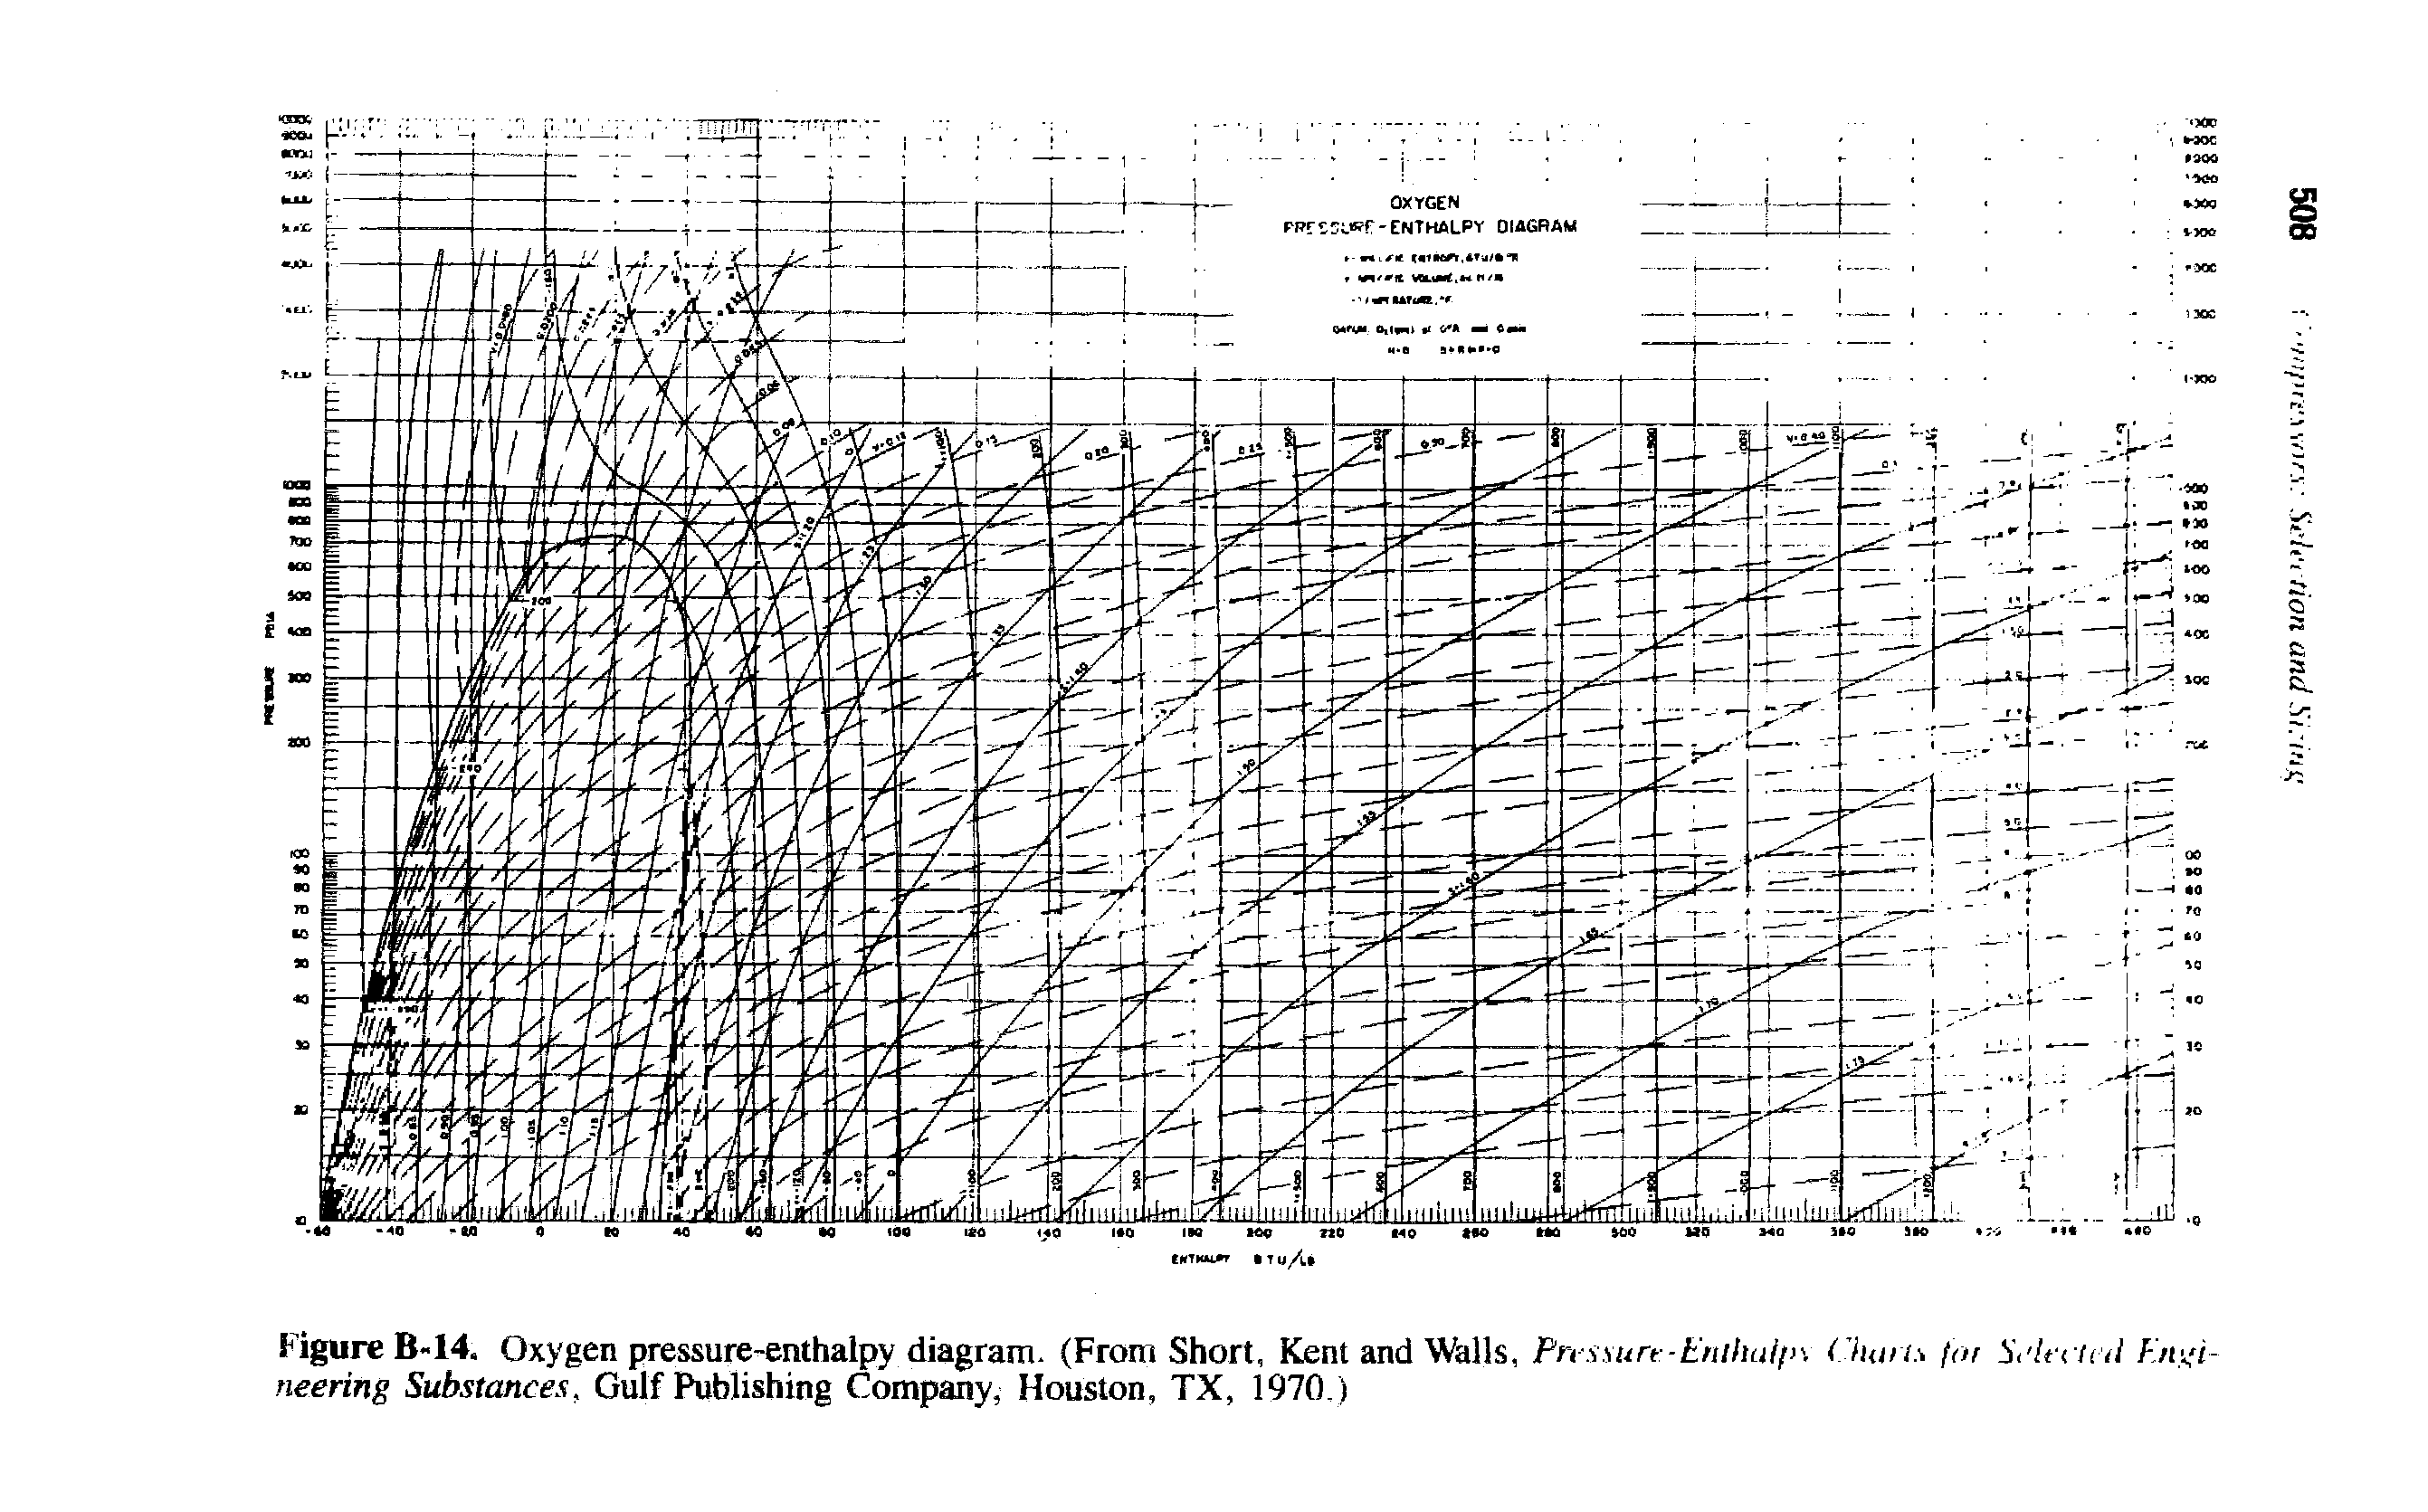 Figure B-14. Oxygen pressure-enthalpy diagram. (From Short, Kent and Walls, Pnssurt-ttiihulp ( han. for S< lfcn tl Kiv/i-neering Substances, Gulf Publishing Company, Houston, TX, 1970.)...